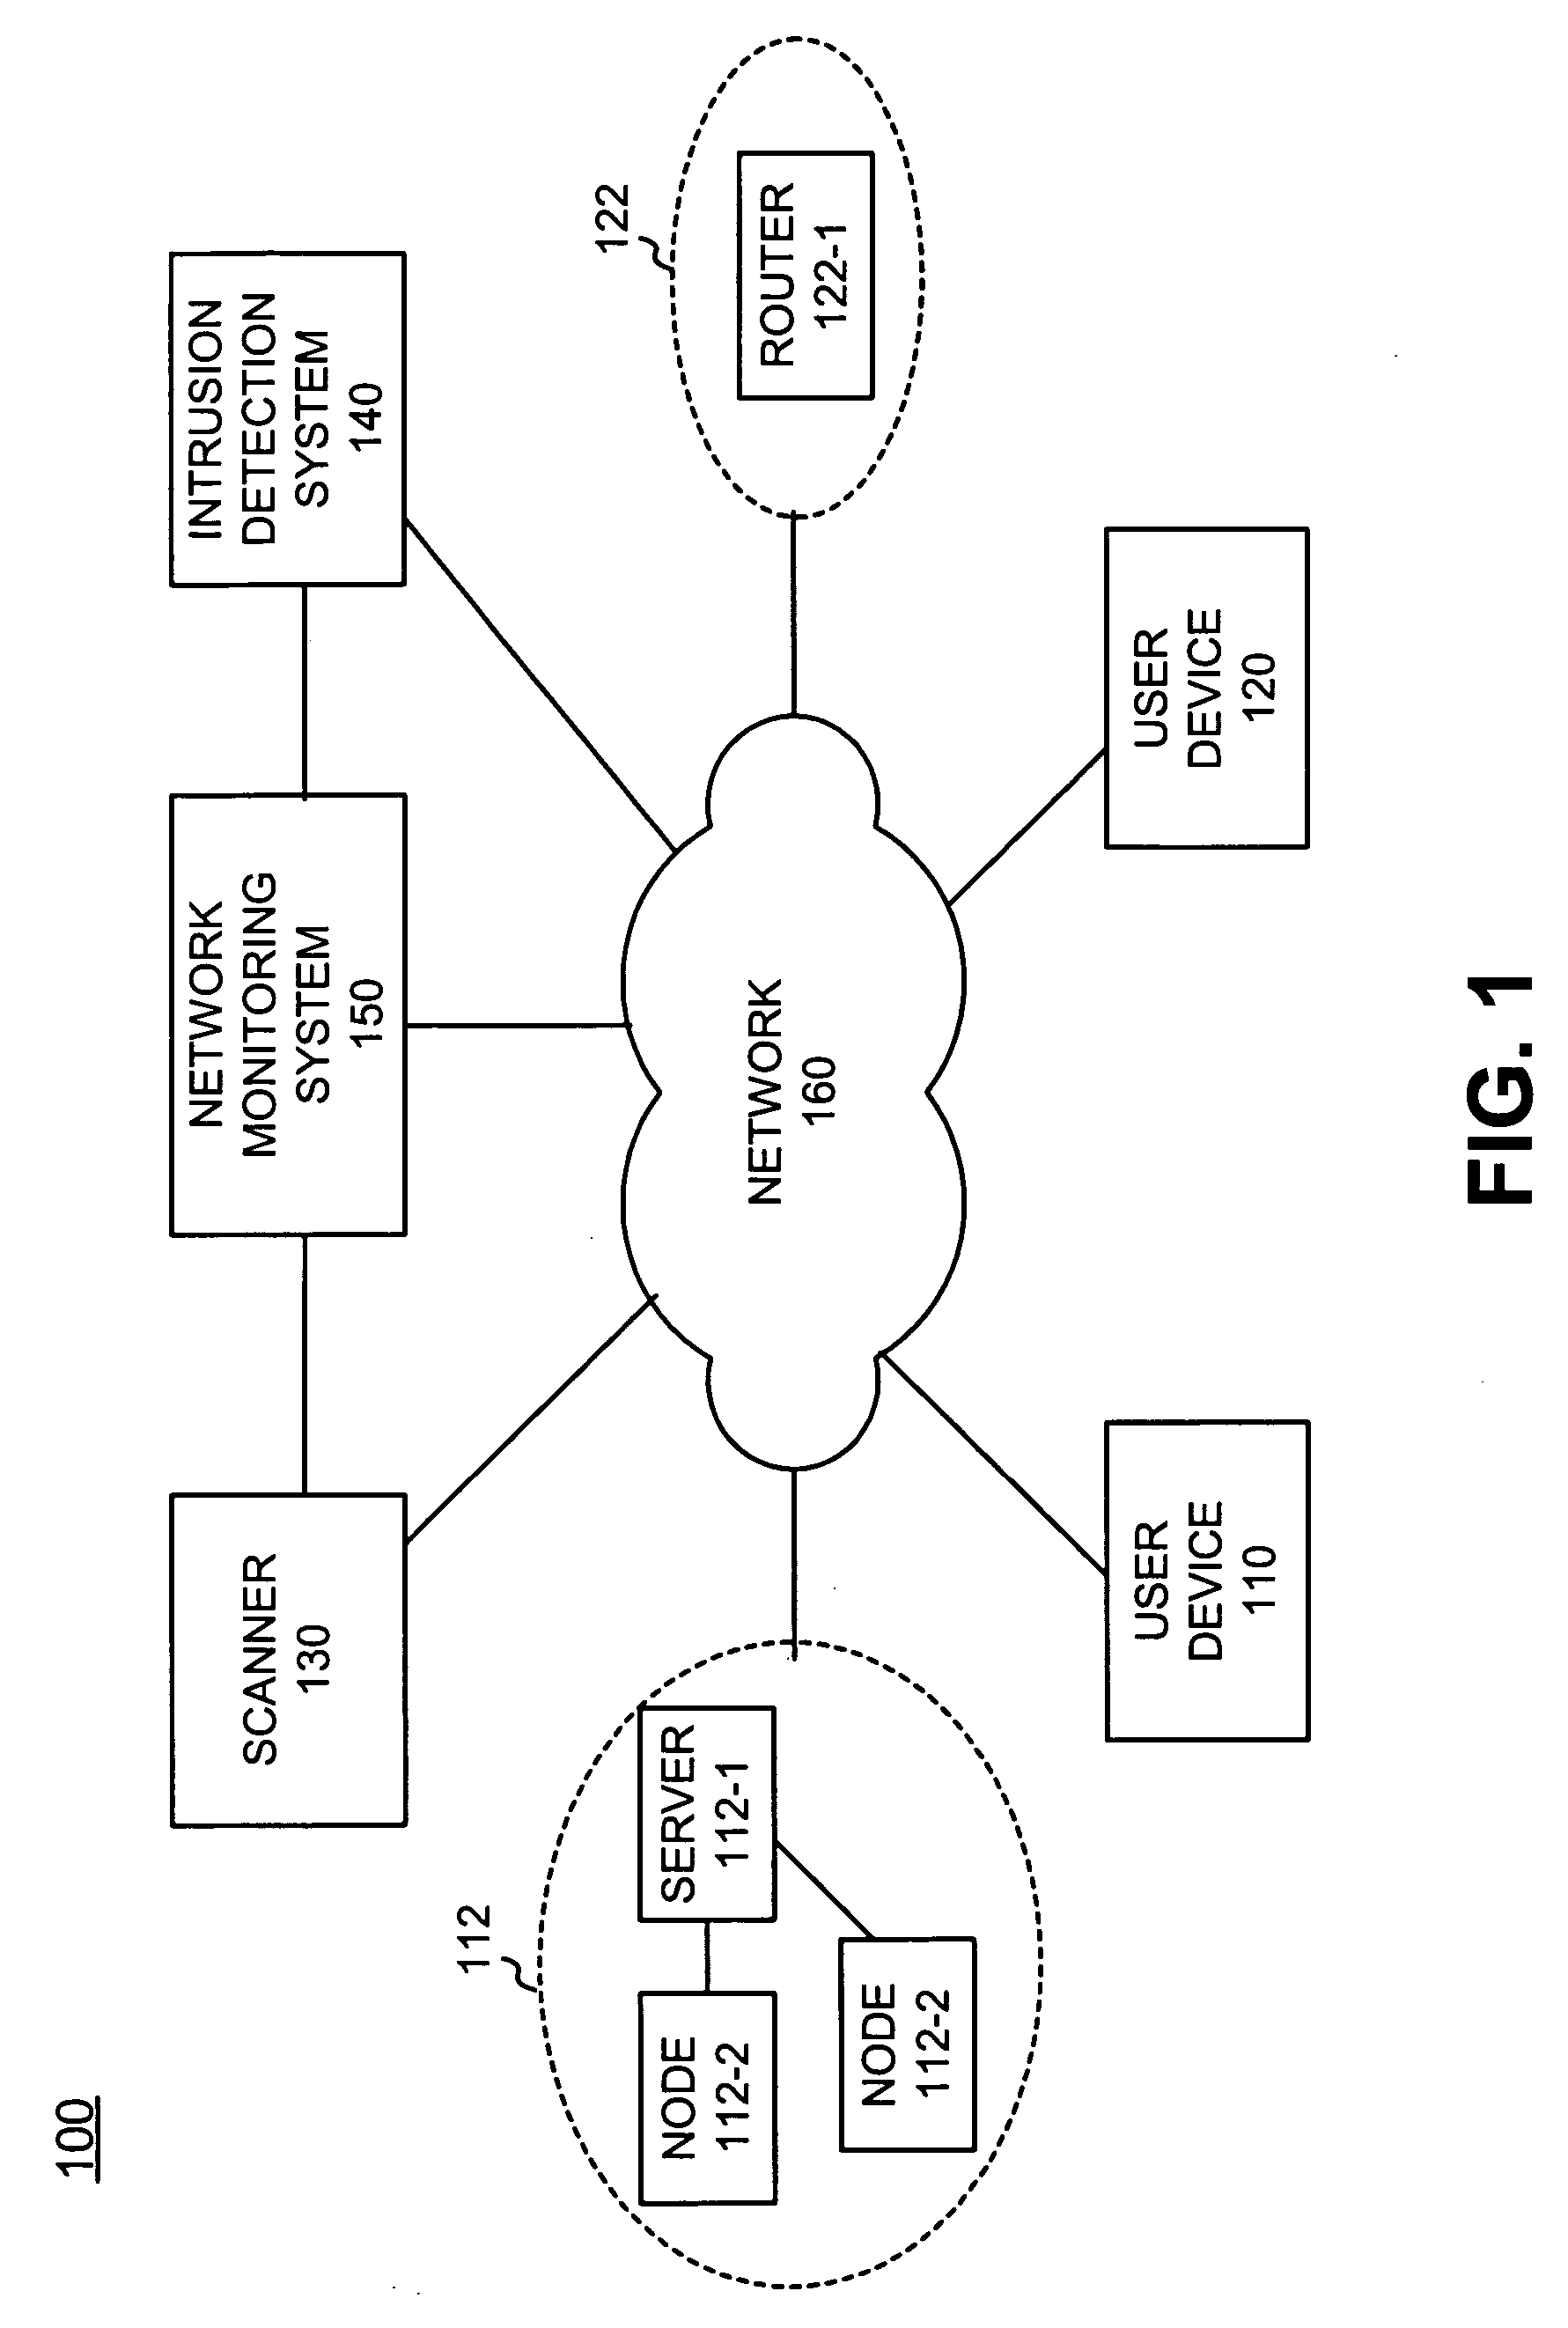 Systems and methods for performing risk analysis